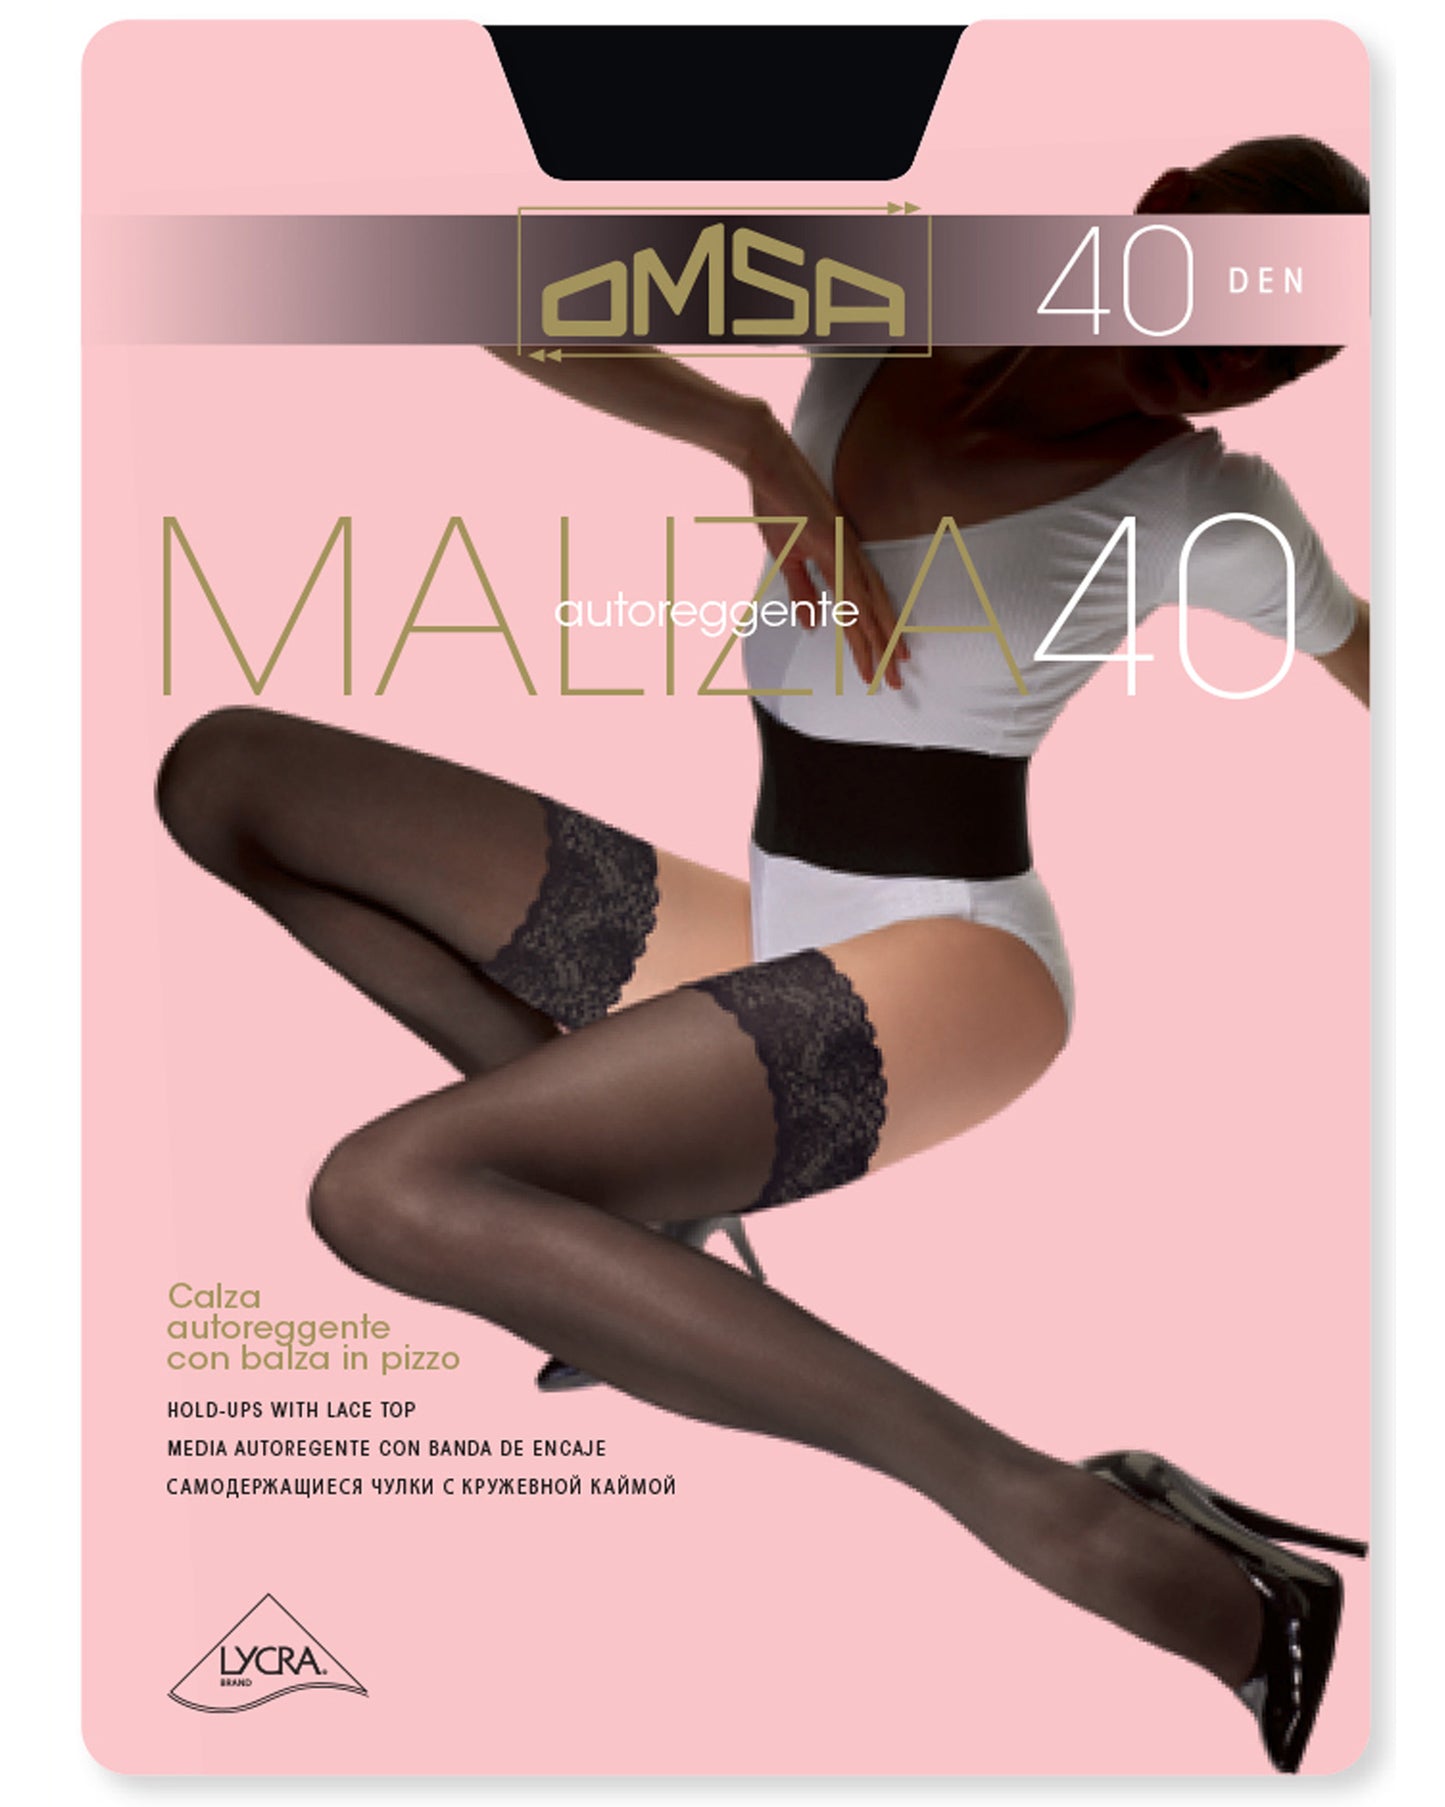 Omsa 527 Malizia 40 Autoreggente - Black semi opaque satin finish hold-ups with a floral lace top with 2 strips of silicone and invisible toe.